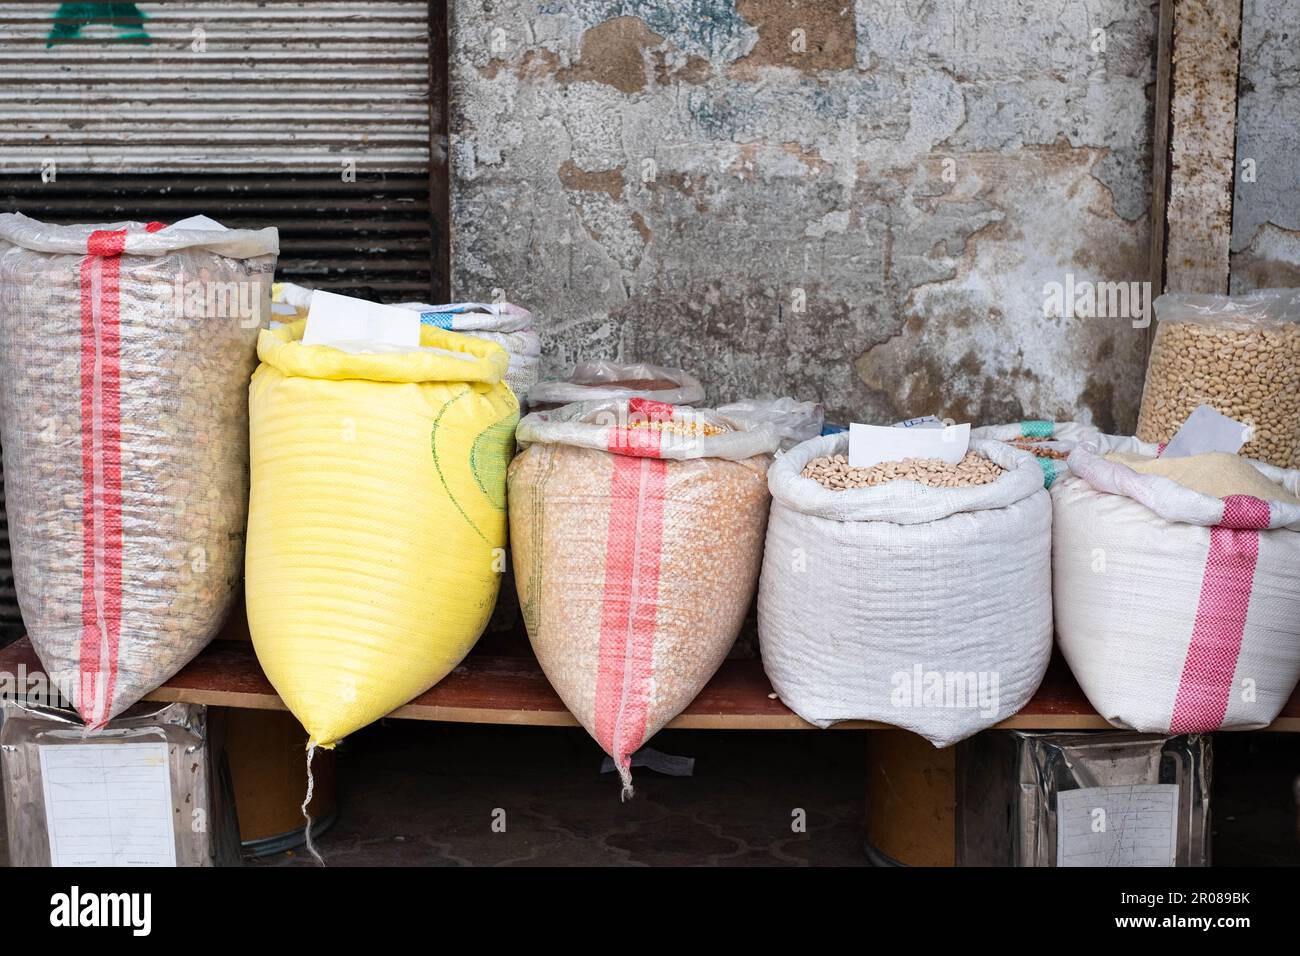 Bags of food, almonds, nuts, corn and flour on street market Stock Photo